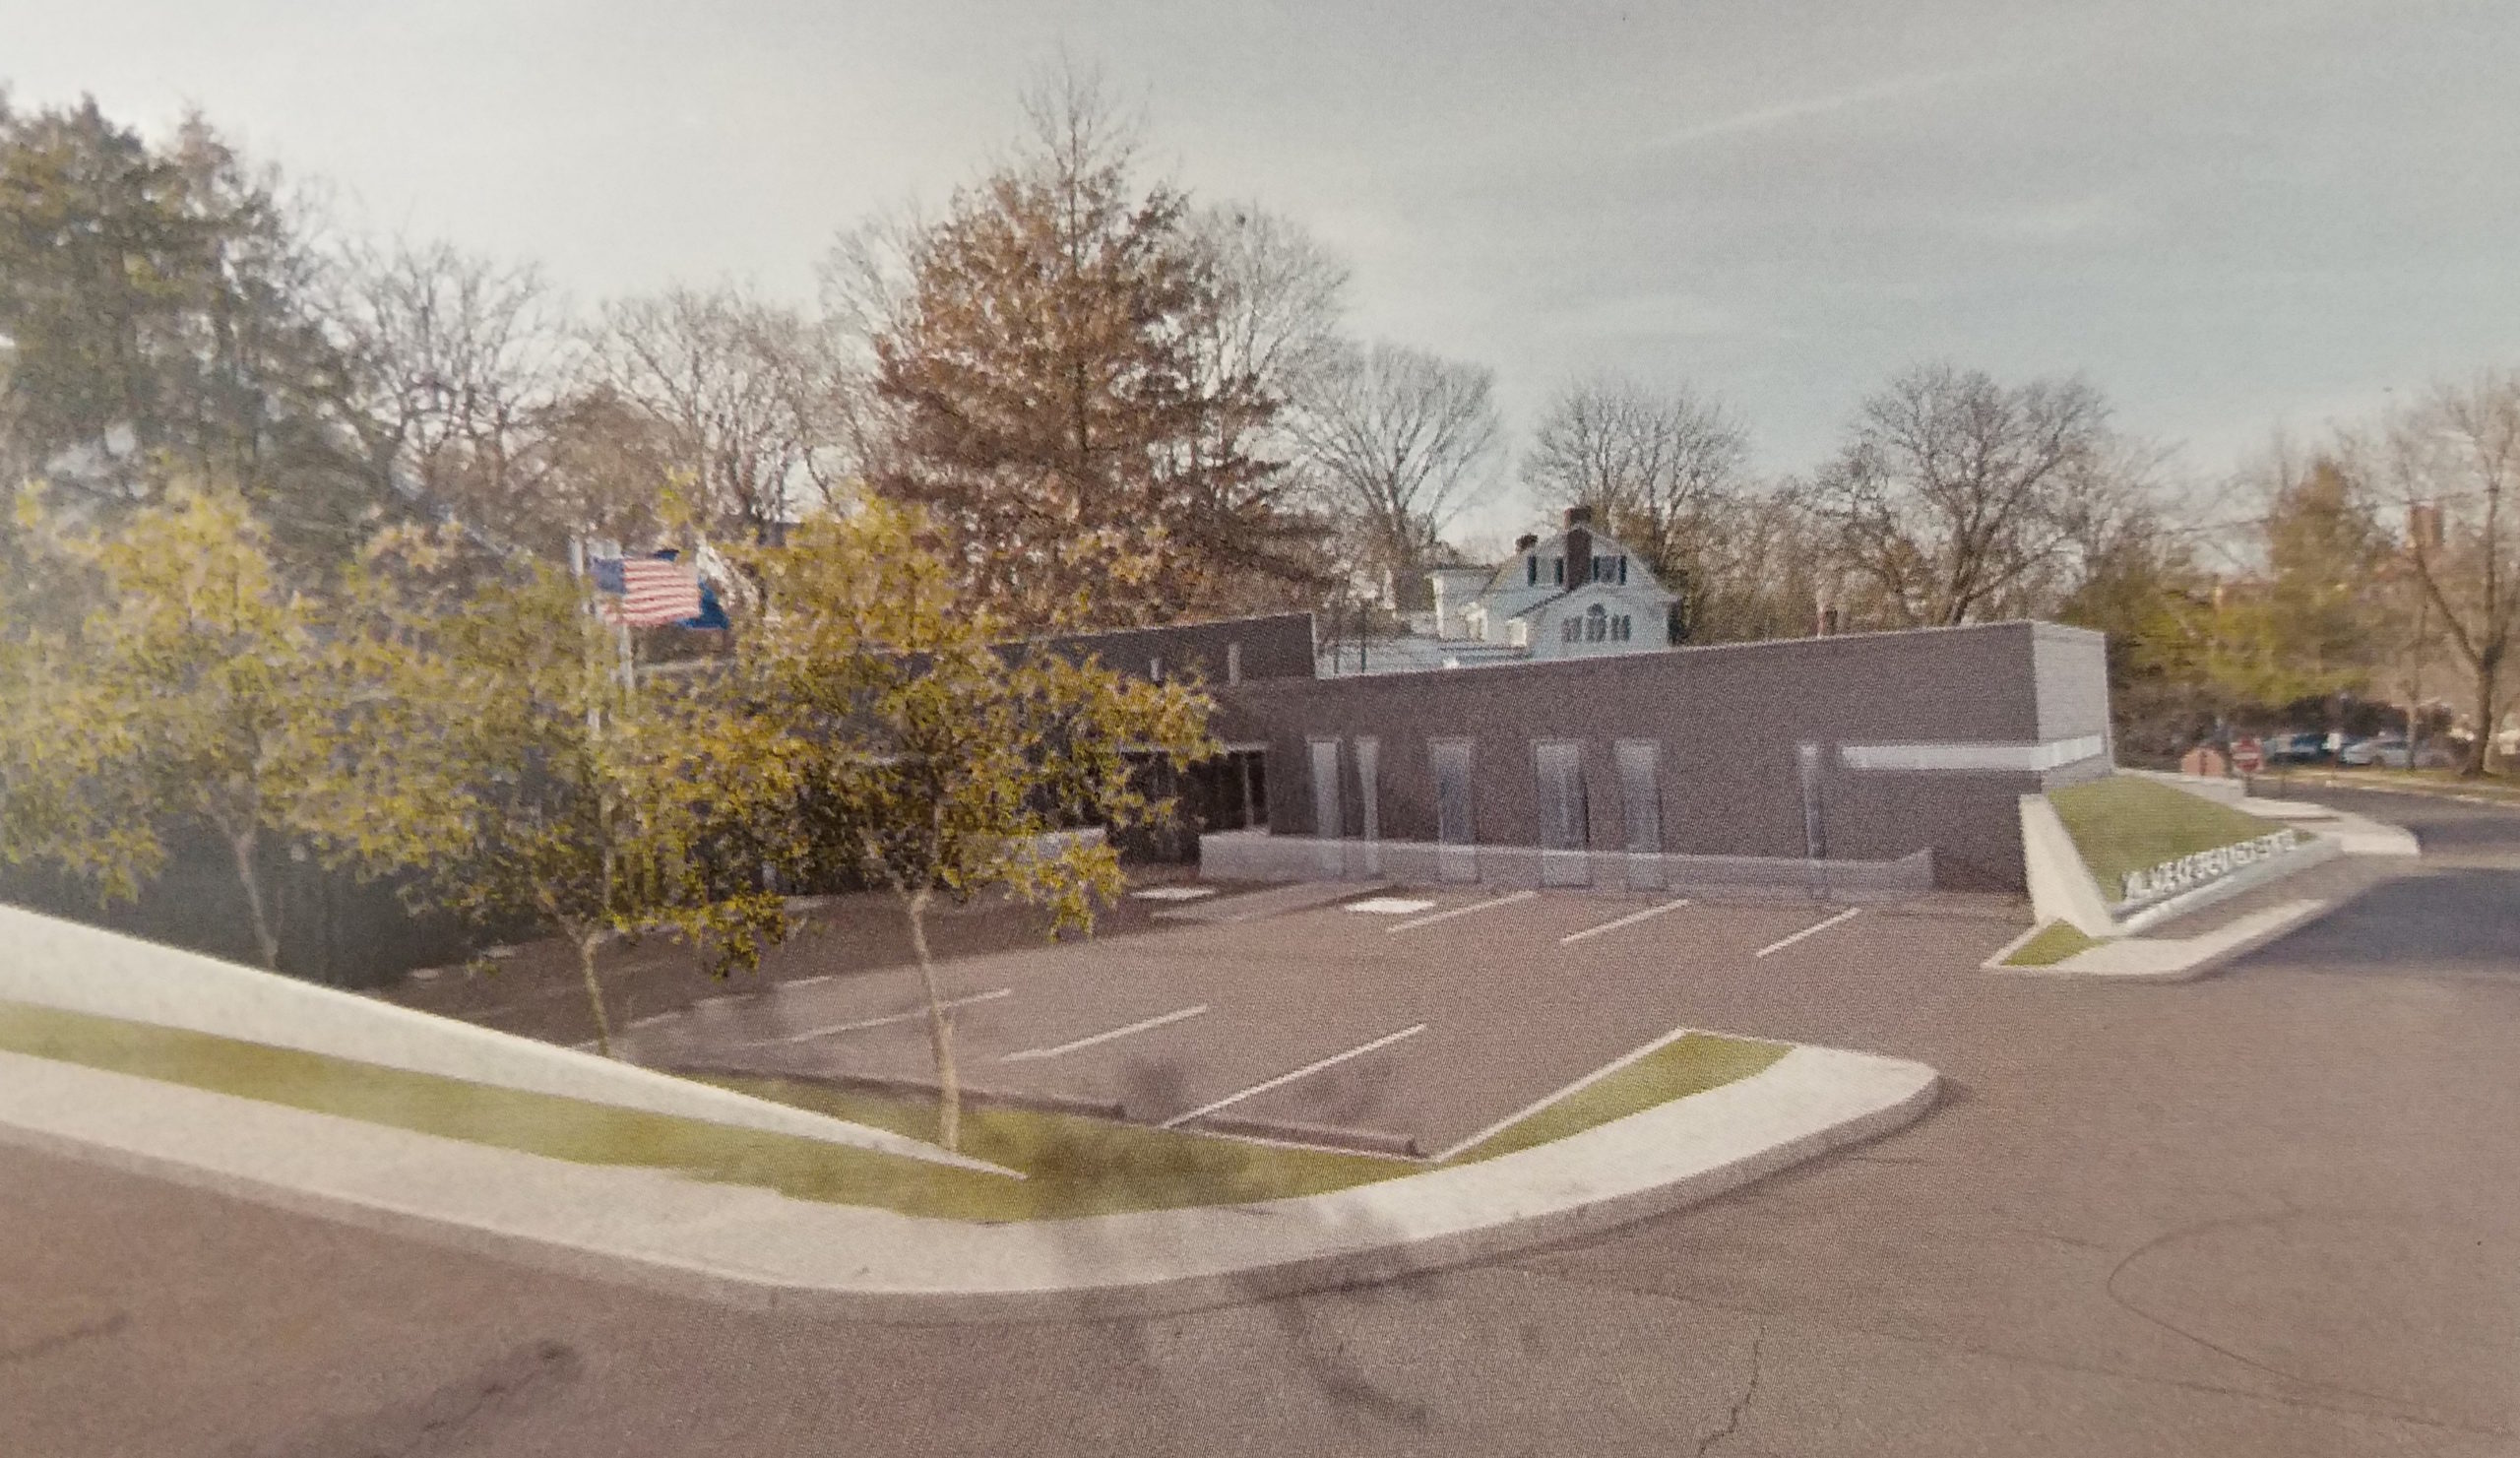 A rendering shows that the new village hall would be placed closer toward the commercial end of town, while the old village hall would remain atop the hill. (Photo courtesy of Narofsky Architecture)